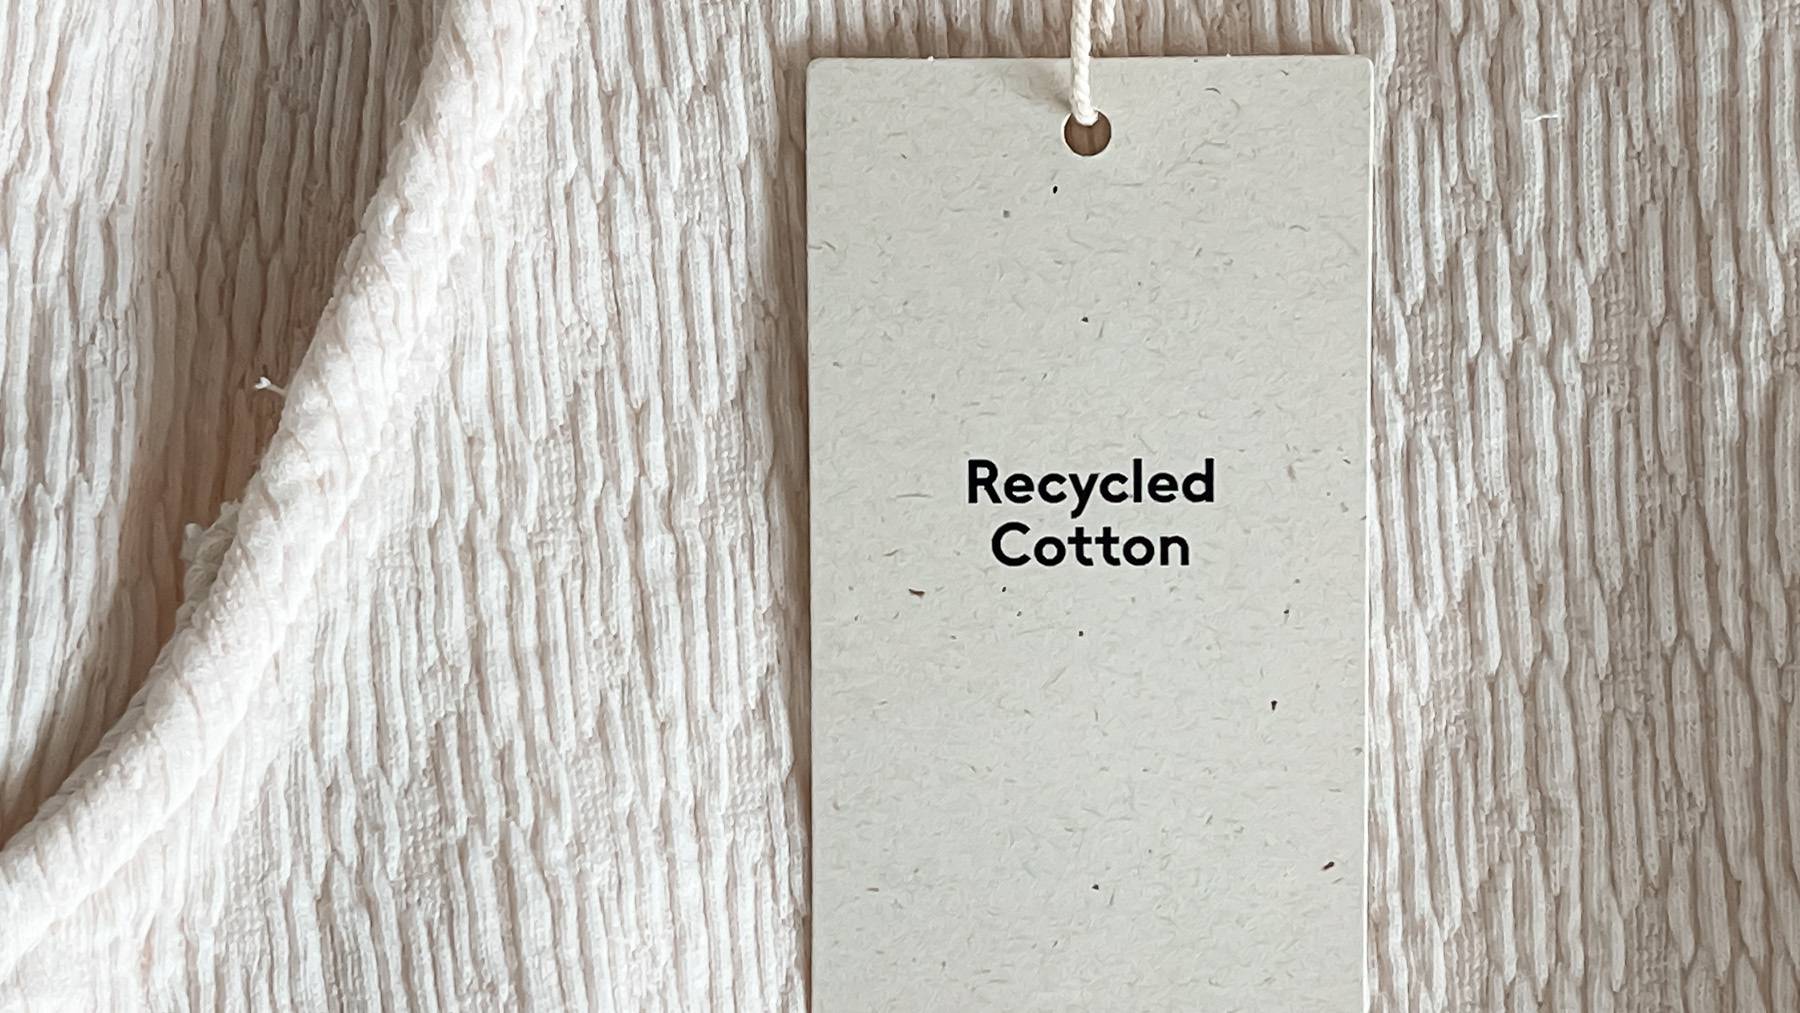 Recycled cotton clothing tag